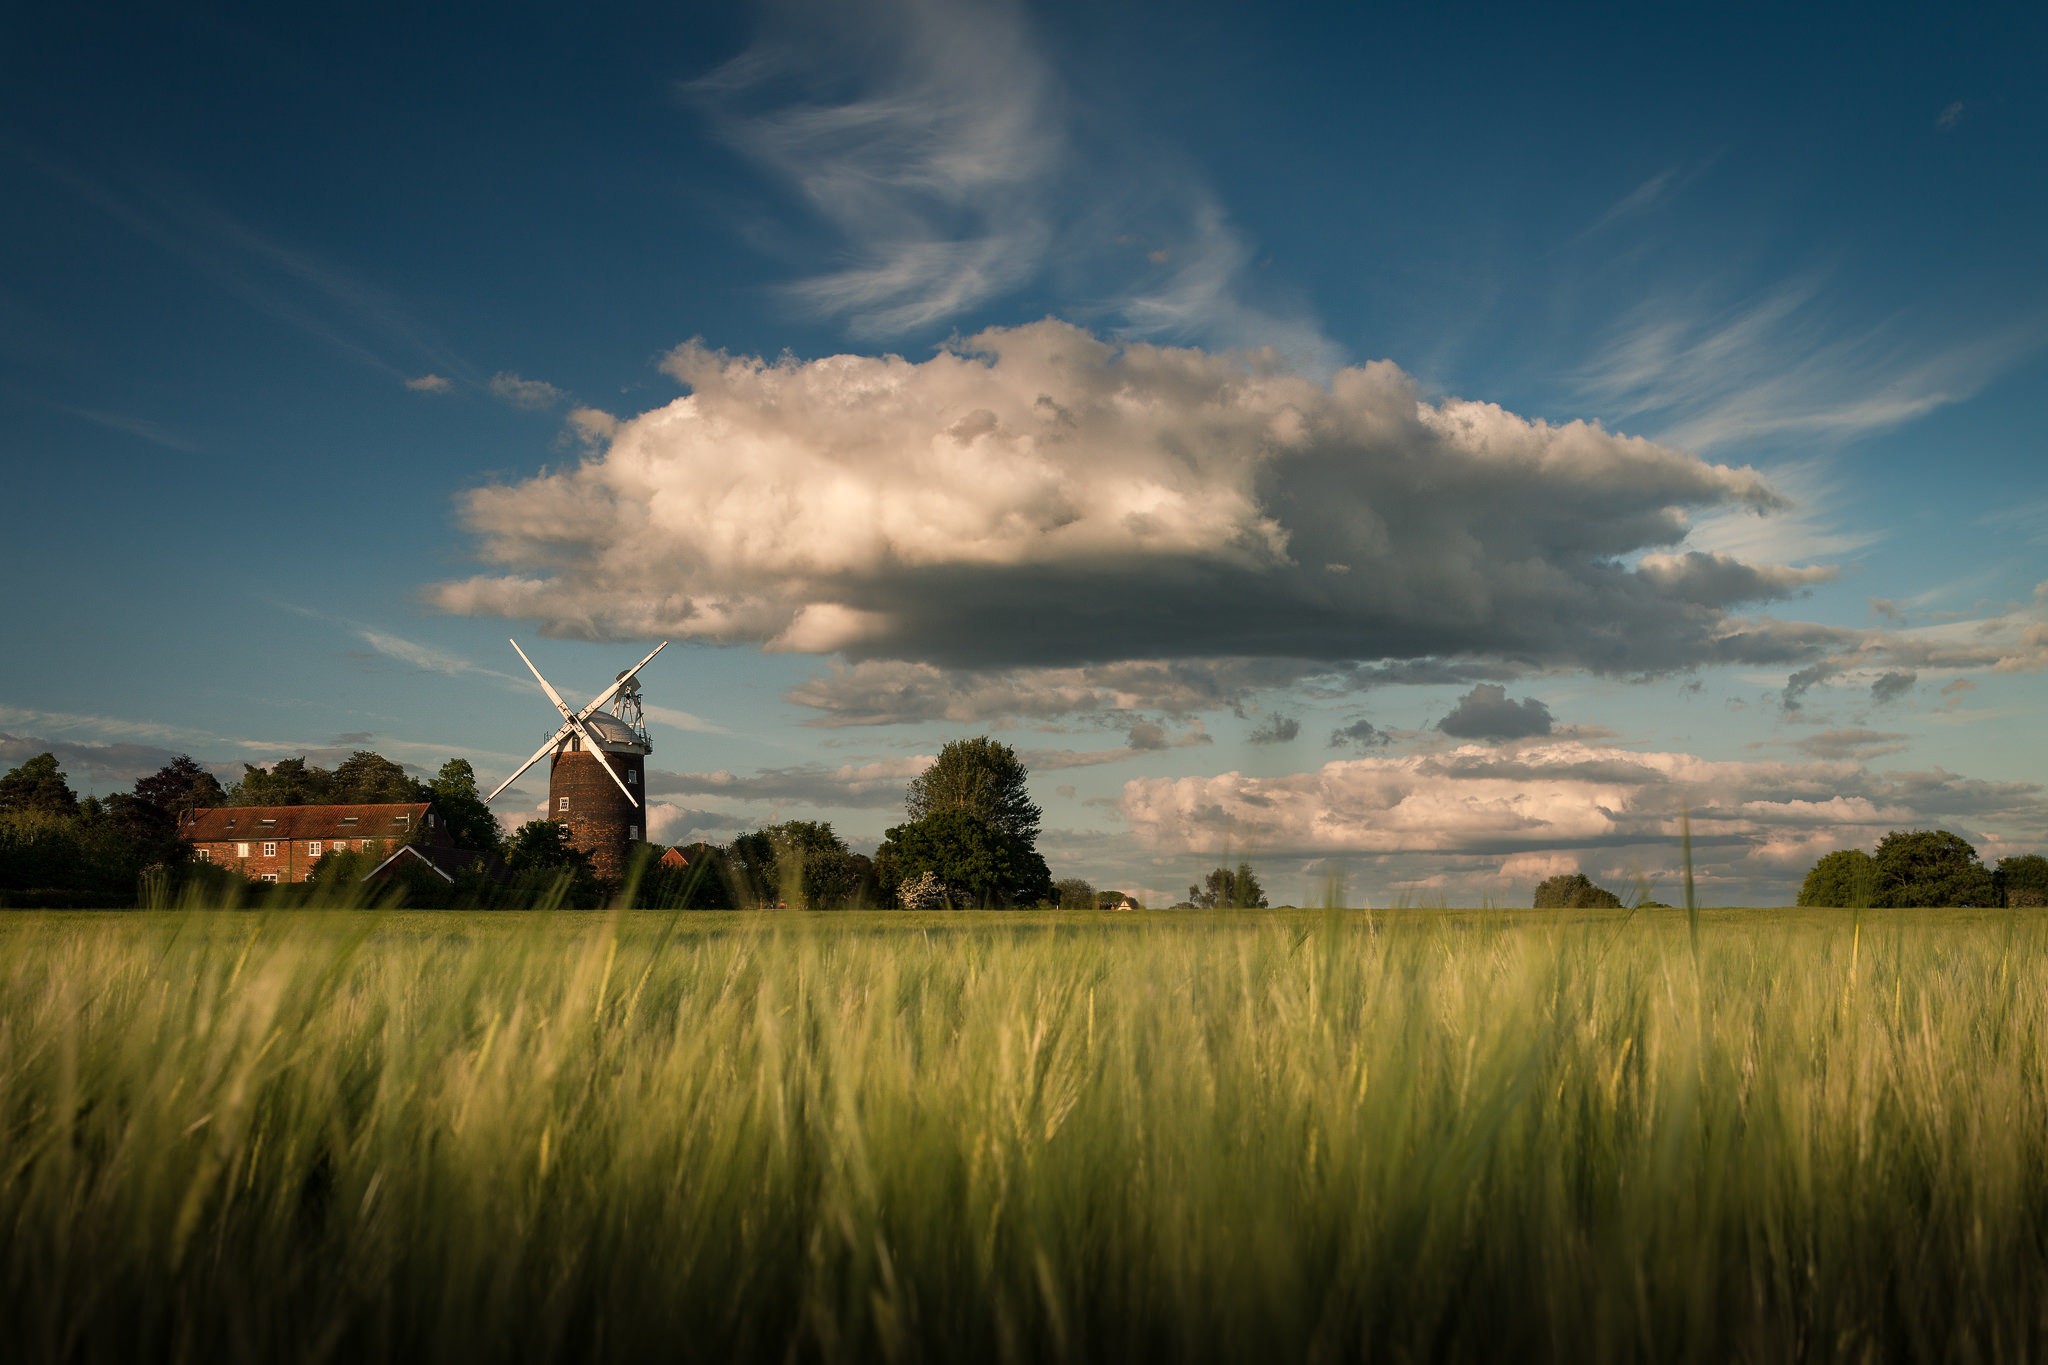 General 2048x1365 nature landscape windmill trees grass house clouds architecture